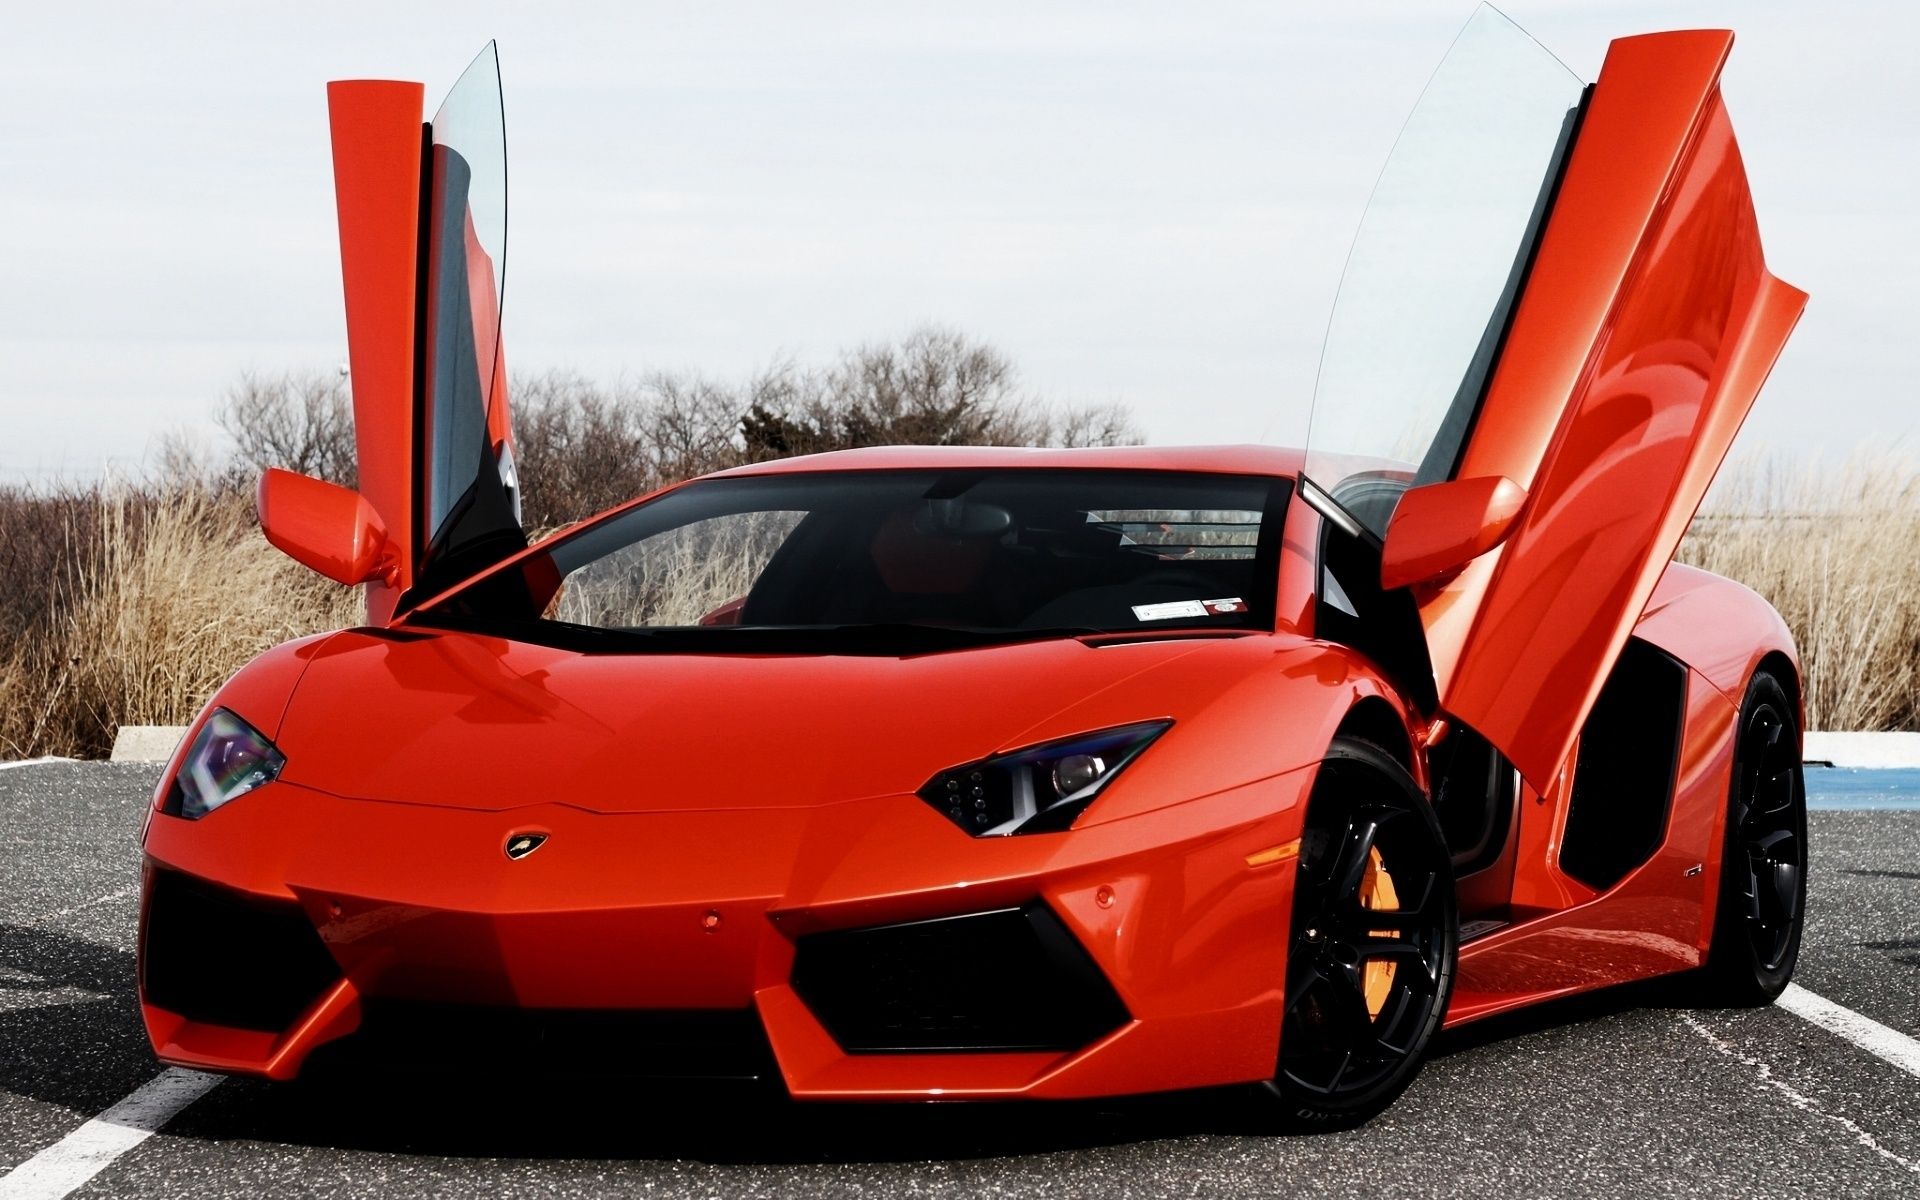 A red lamborghini with its doors open